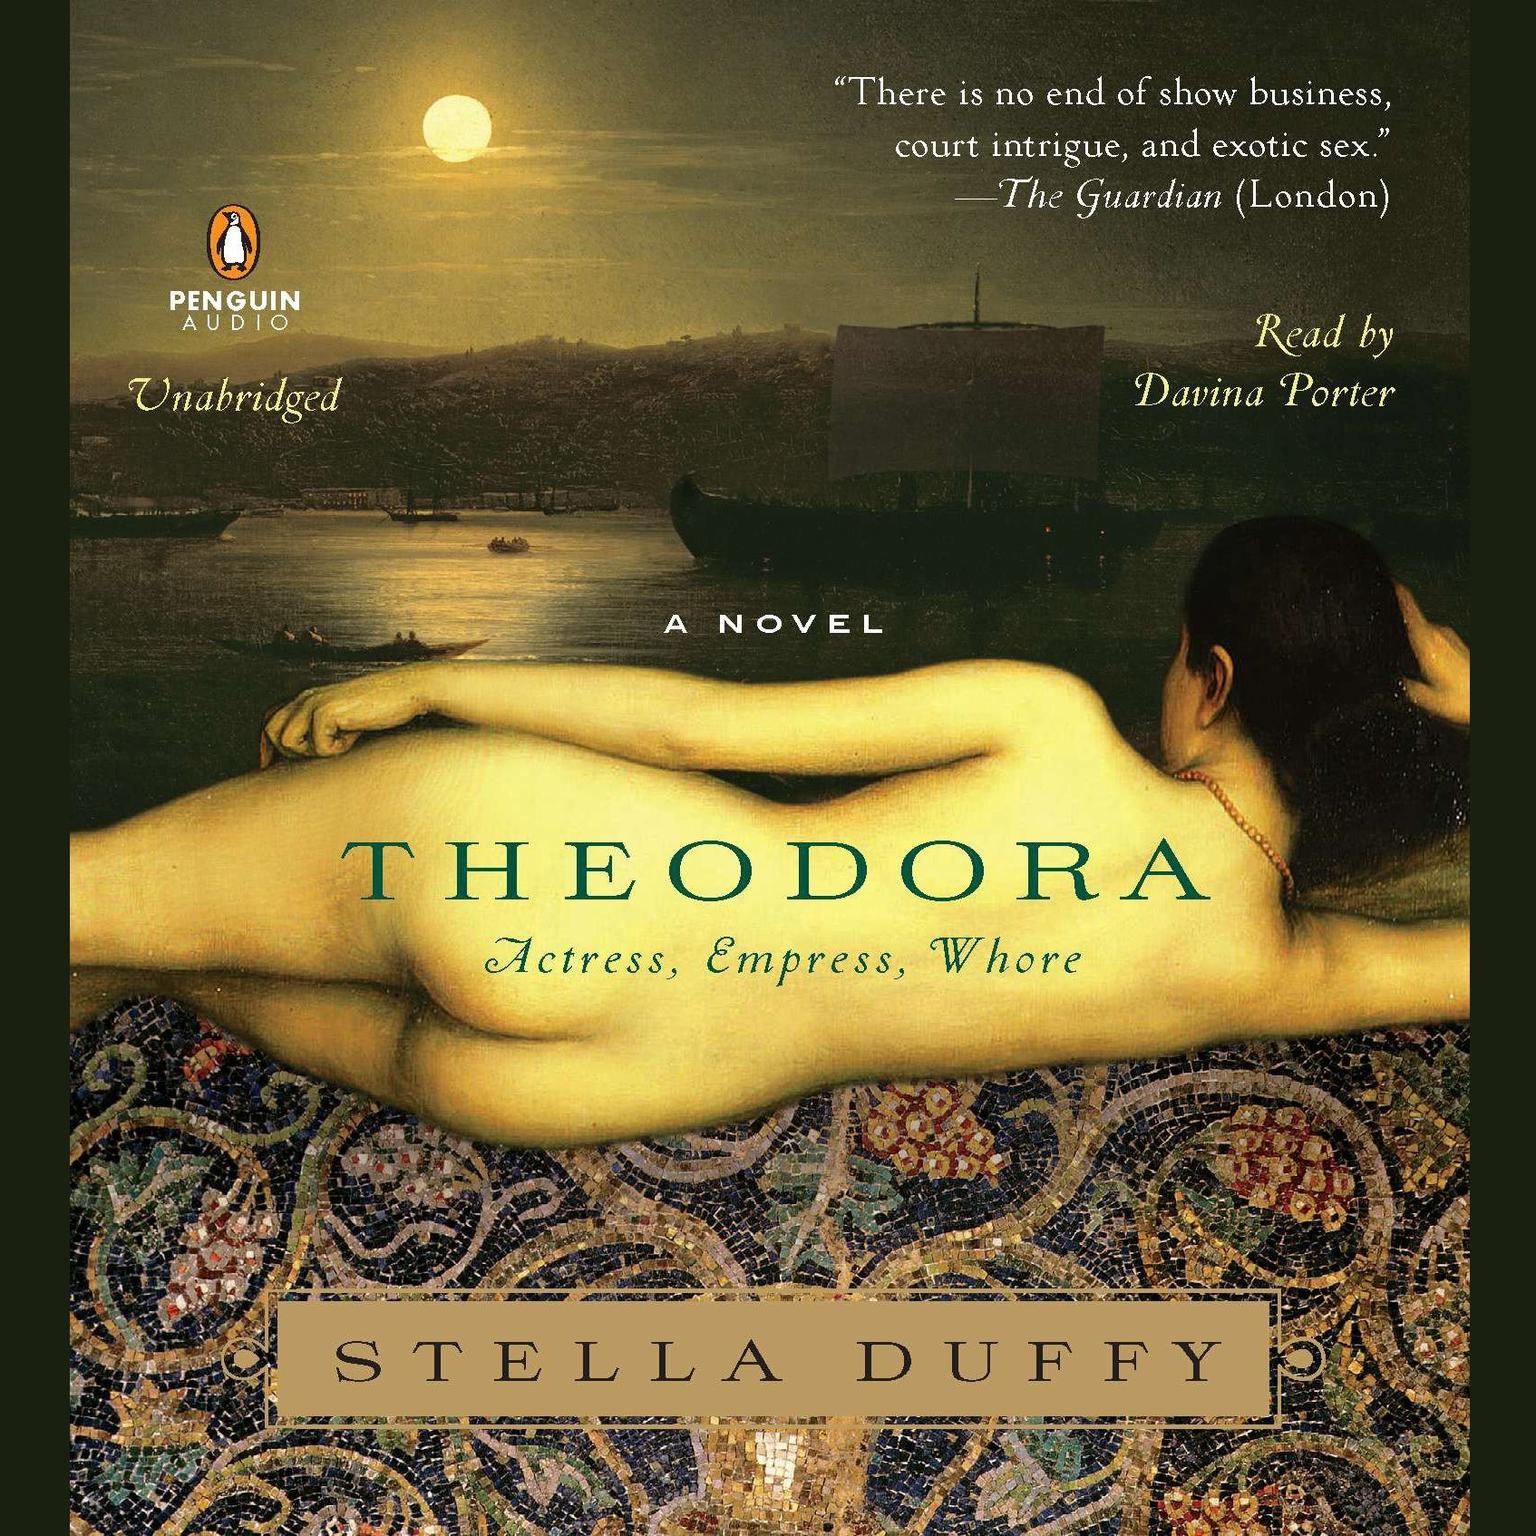 Theodora: Actress, Empress, Whore: A Novel Audiobook, by Stella Duffy